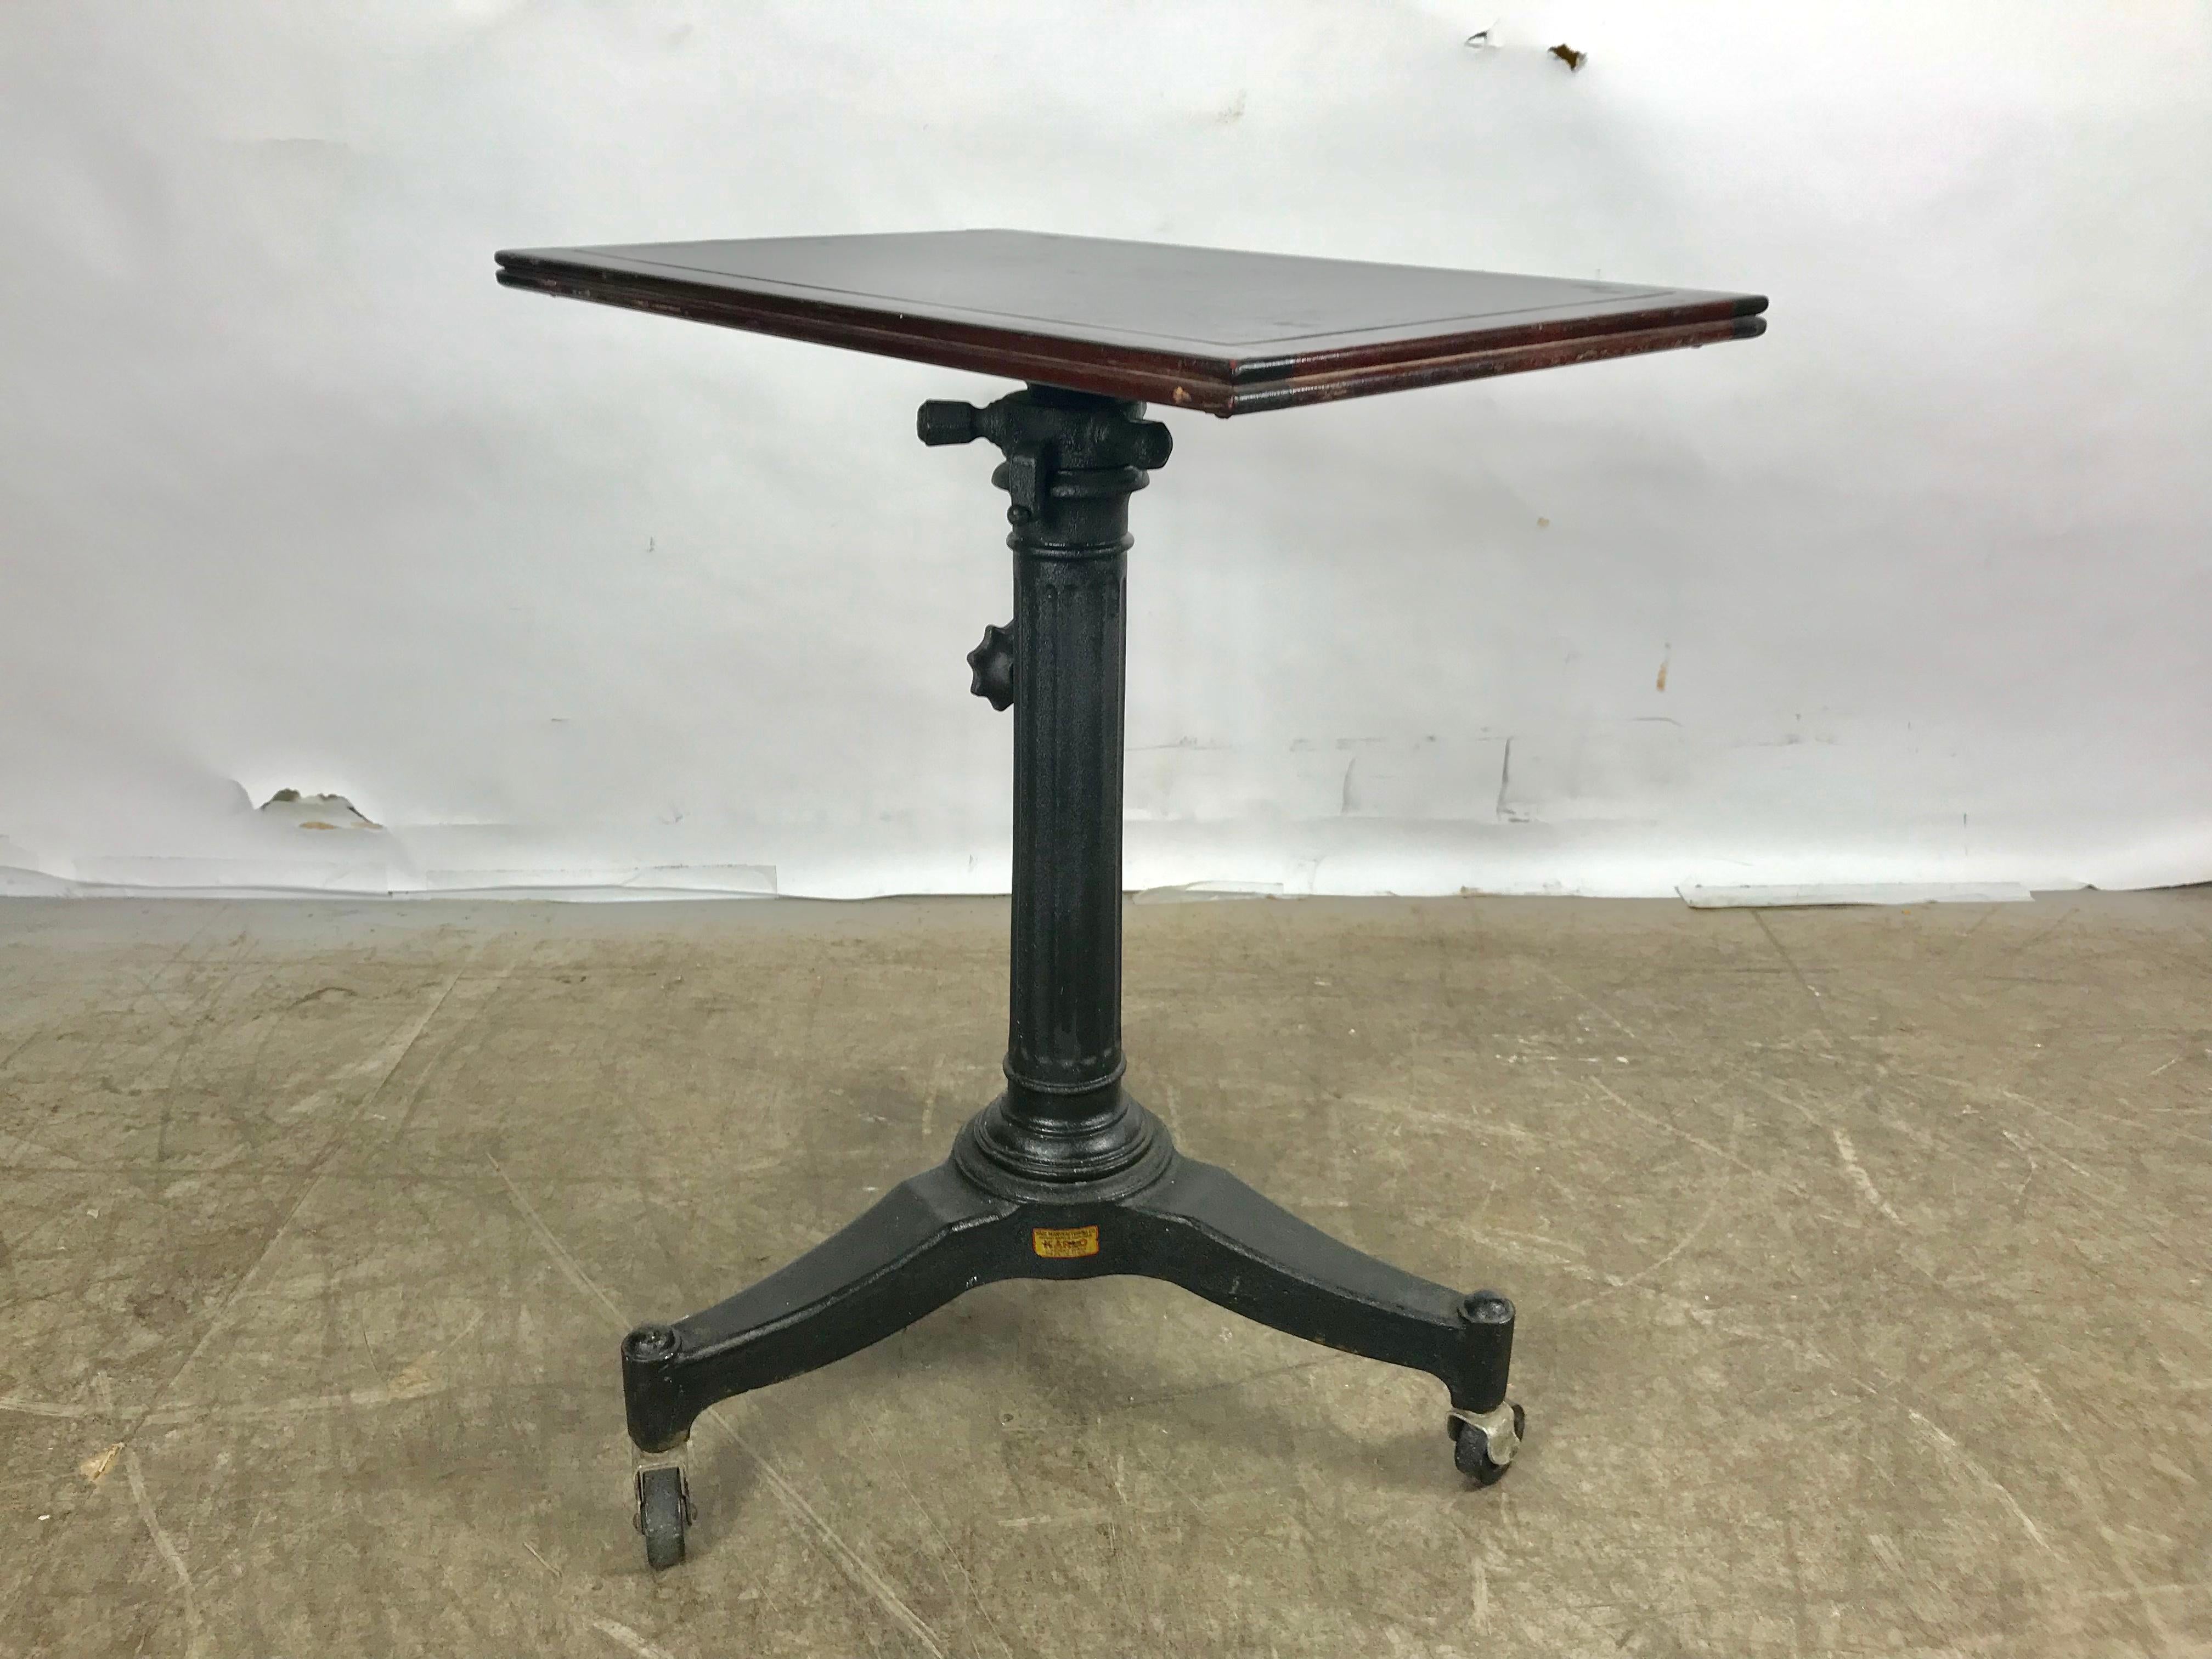 Early 20th Century 1920s Cast Iron and Wood Industrial Adjustable Table by Karl Manufacturing Co.